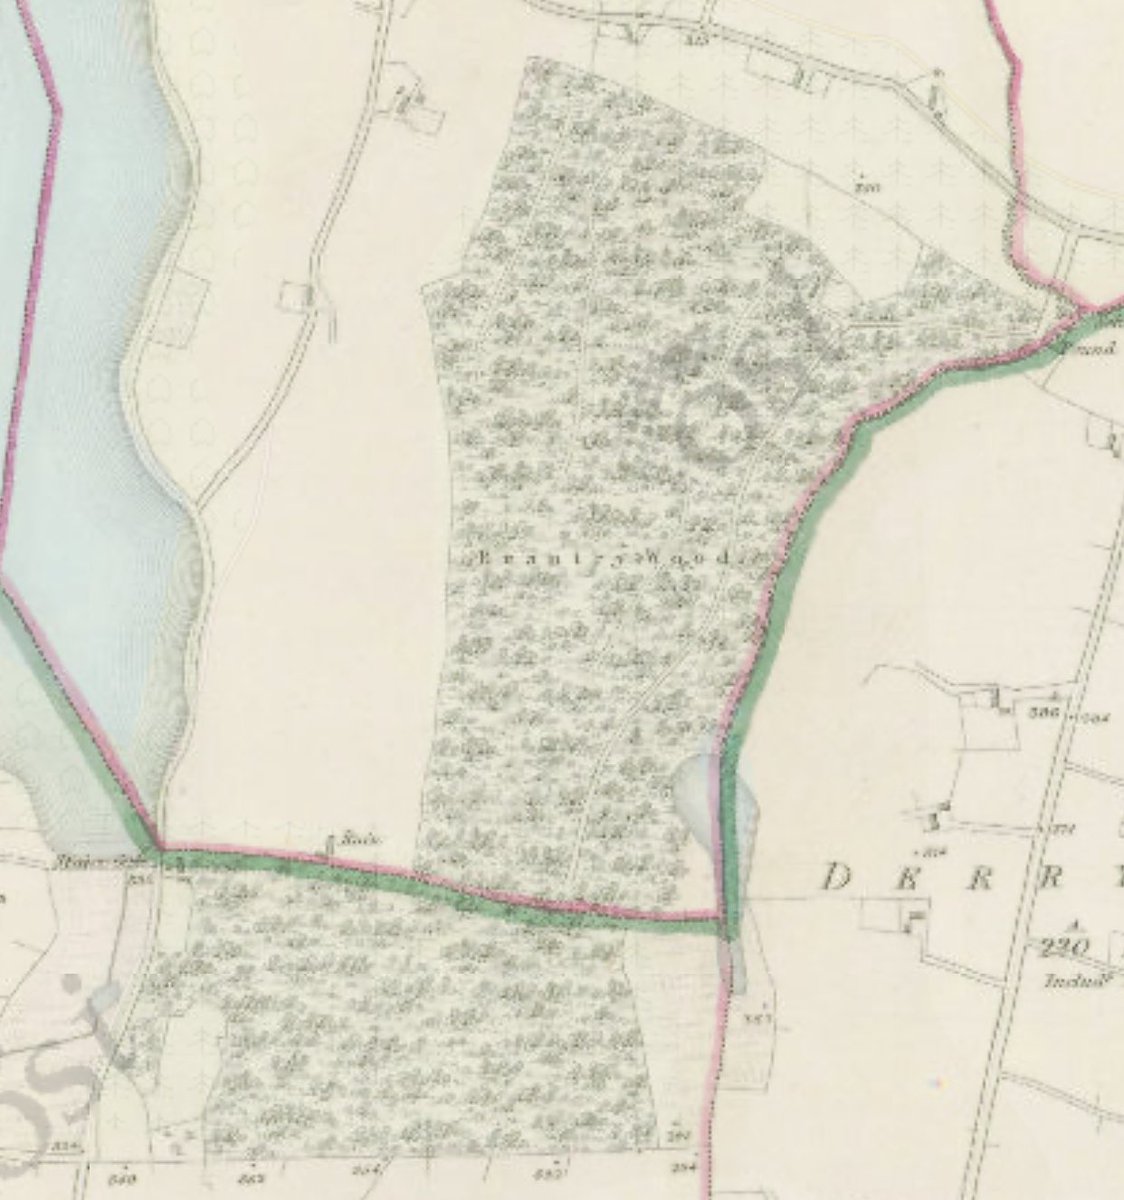 by 1830 the biggest remaining chunk was Brantry (Braintree) Wood, which clocked in at about 100acres. this was probably an oakwood